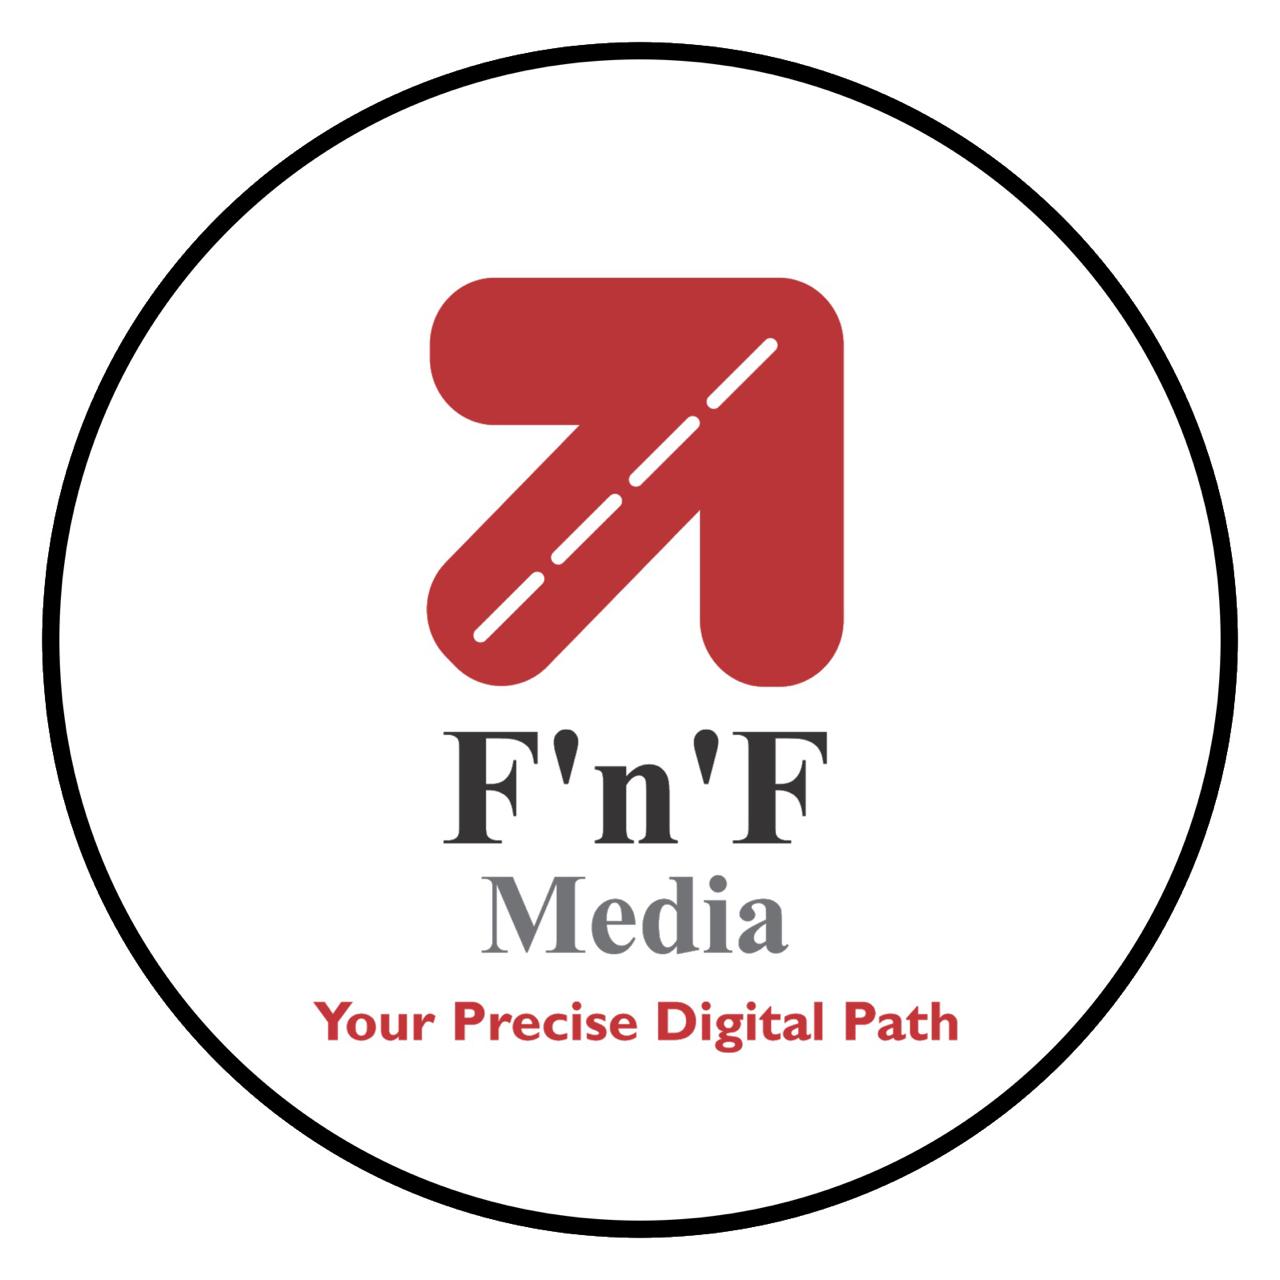 FNF MEDIA has unmatched digital solutions for every business!